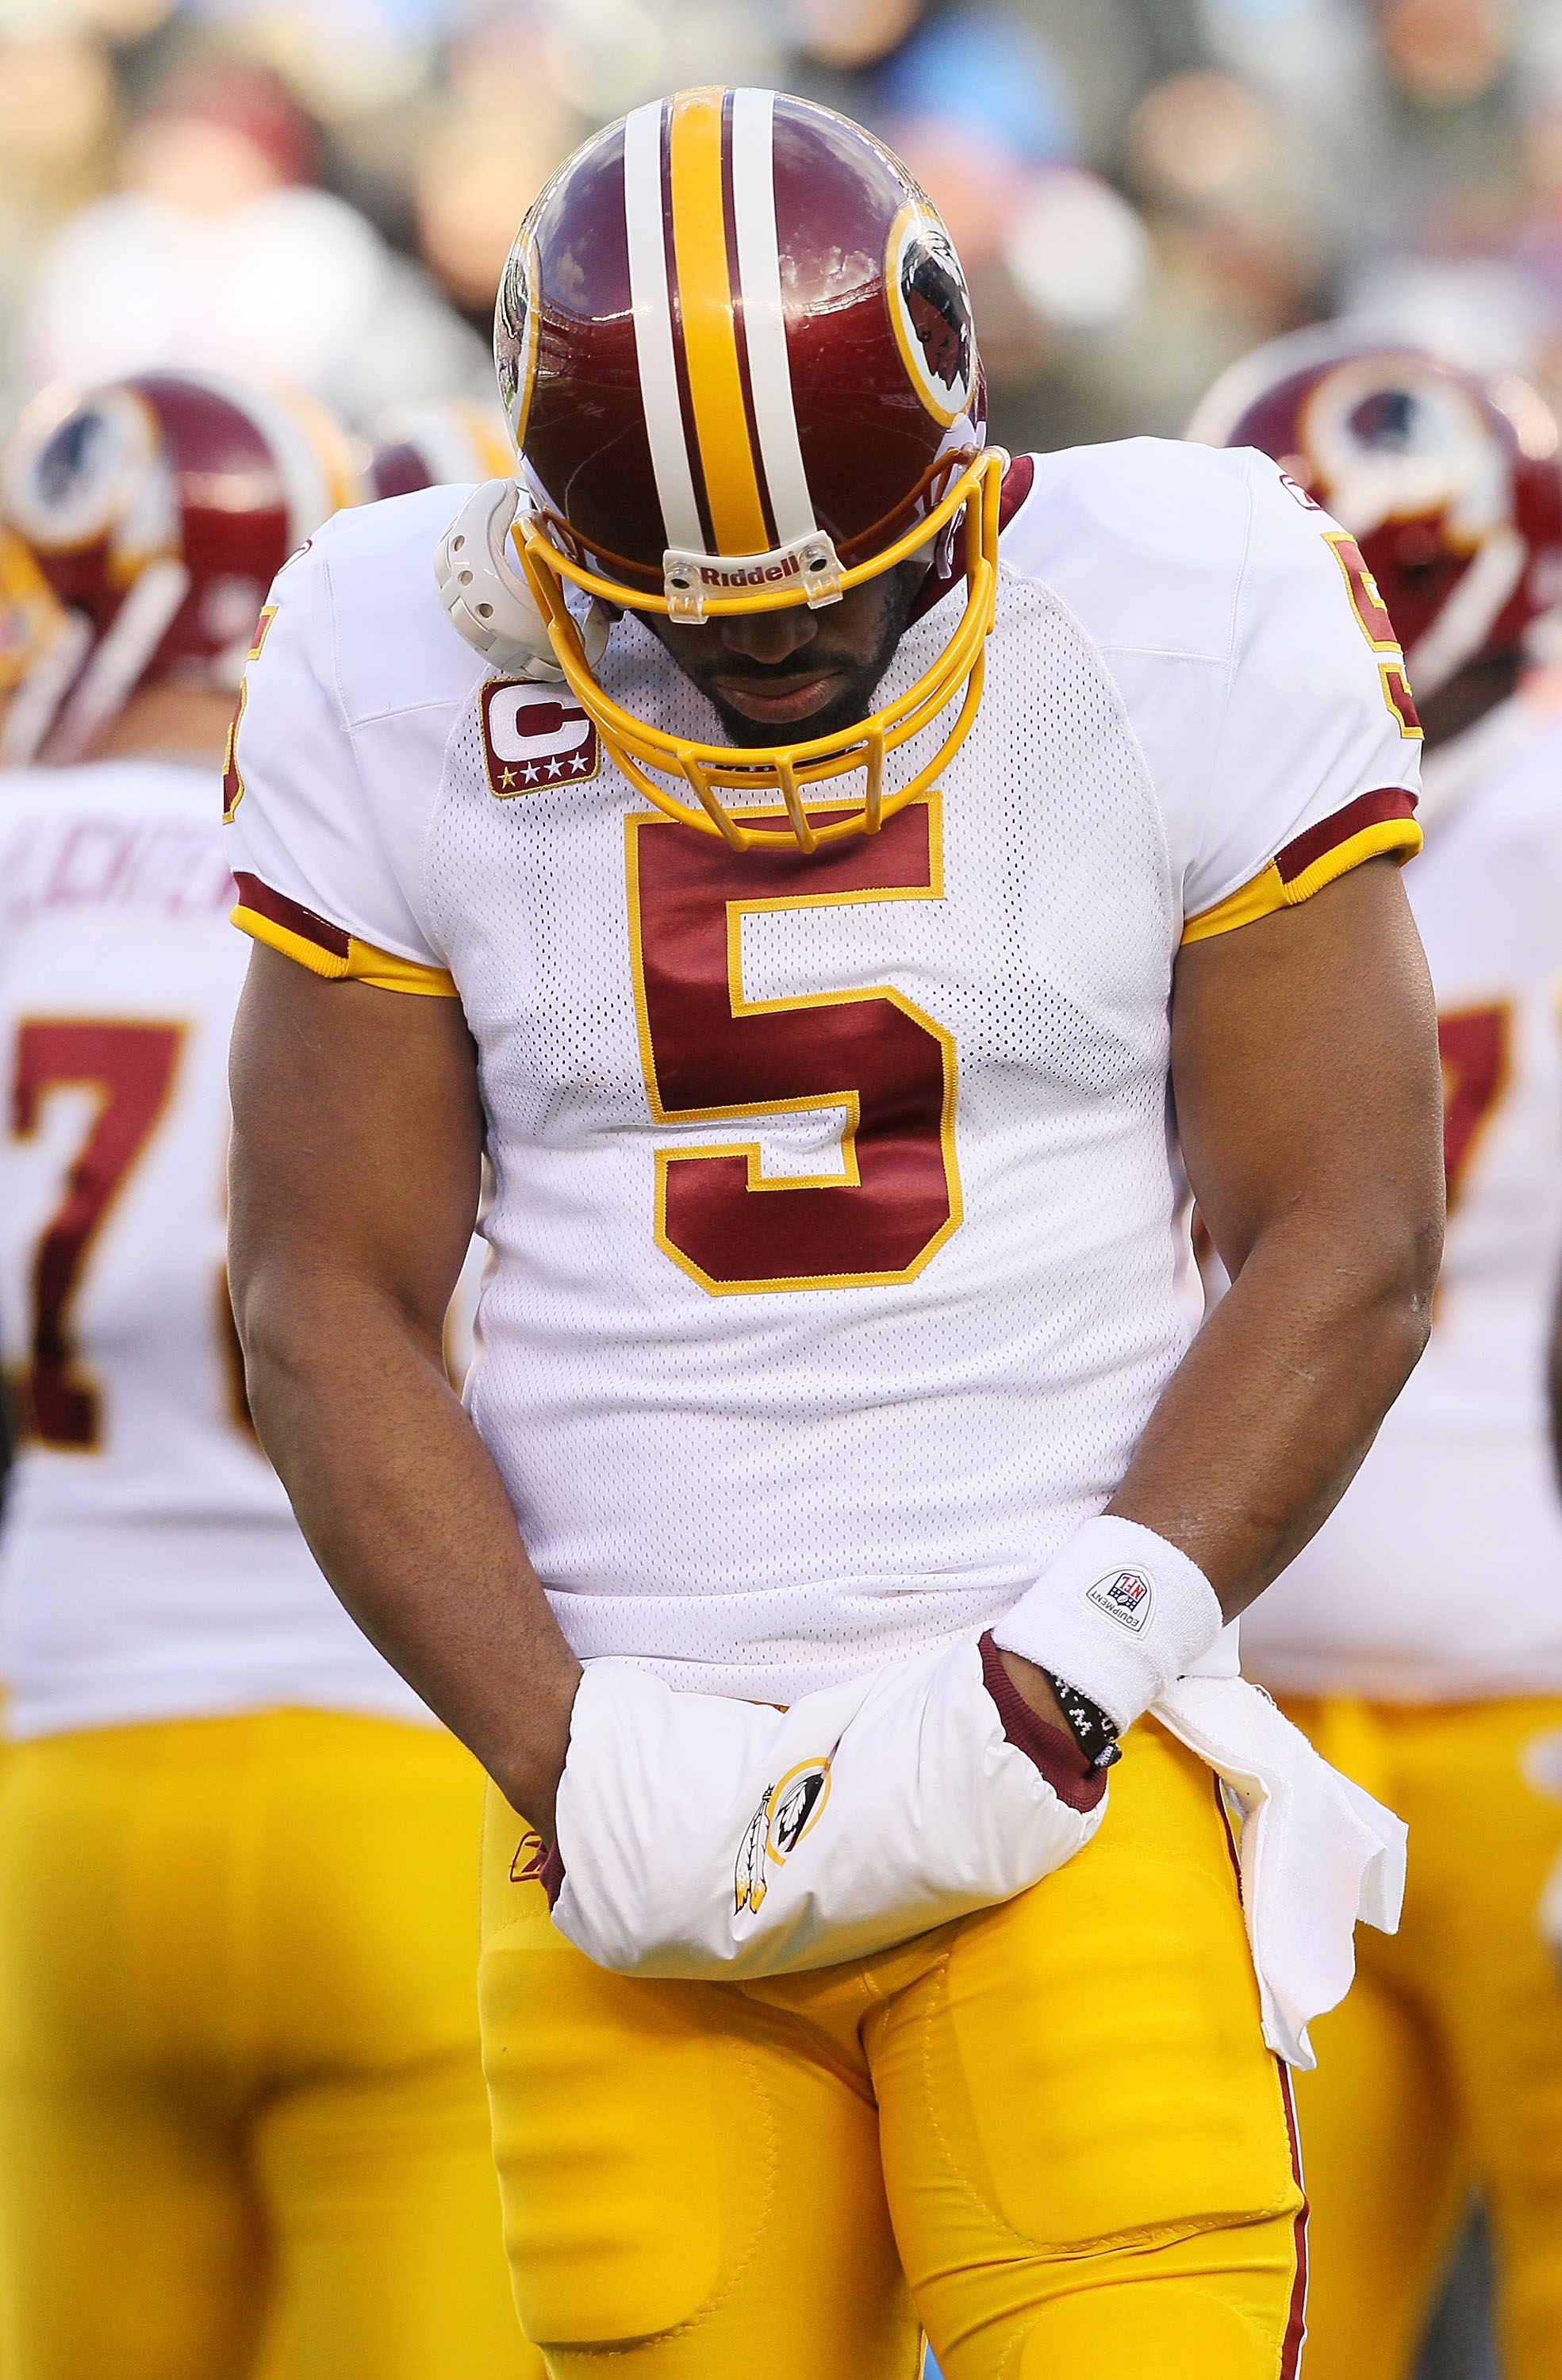 EAST RUTHERFORD, NJ - DECEMBER 05:  Donovan McNabb #5 of the Washington Redskins looks on against the New York Giants on December 5, 2010 at the New Meadowlands Stadium in East Rutherford, New Jersey.  (Photo by Jim McIsaac/Getty Images)